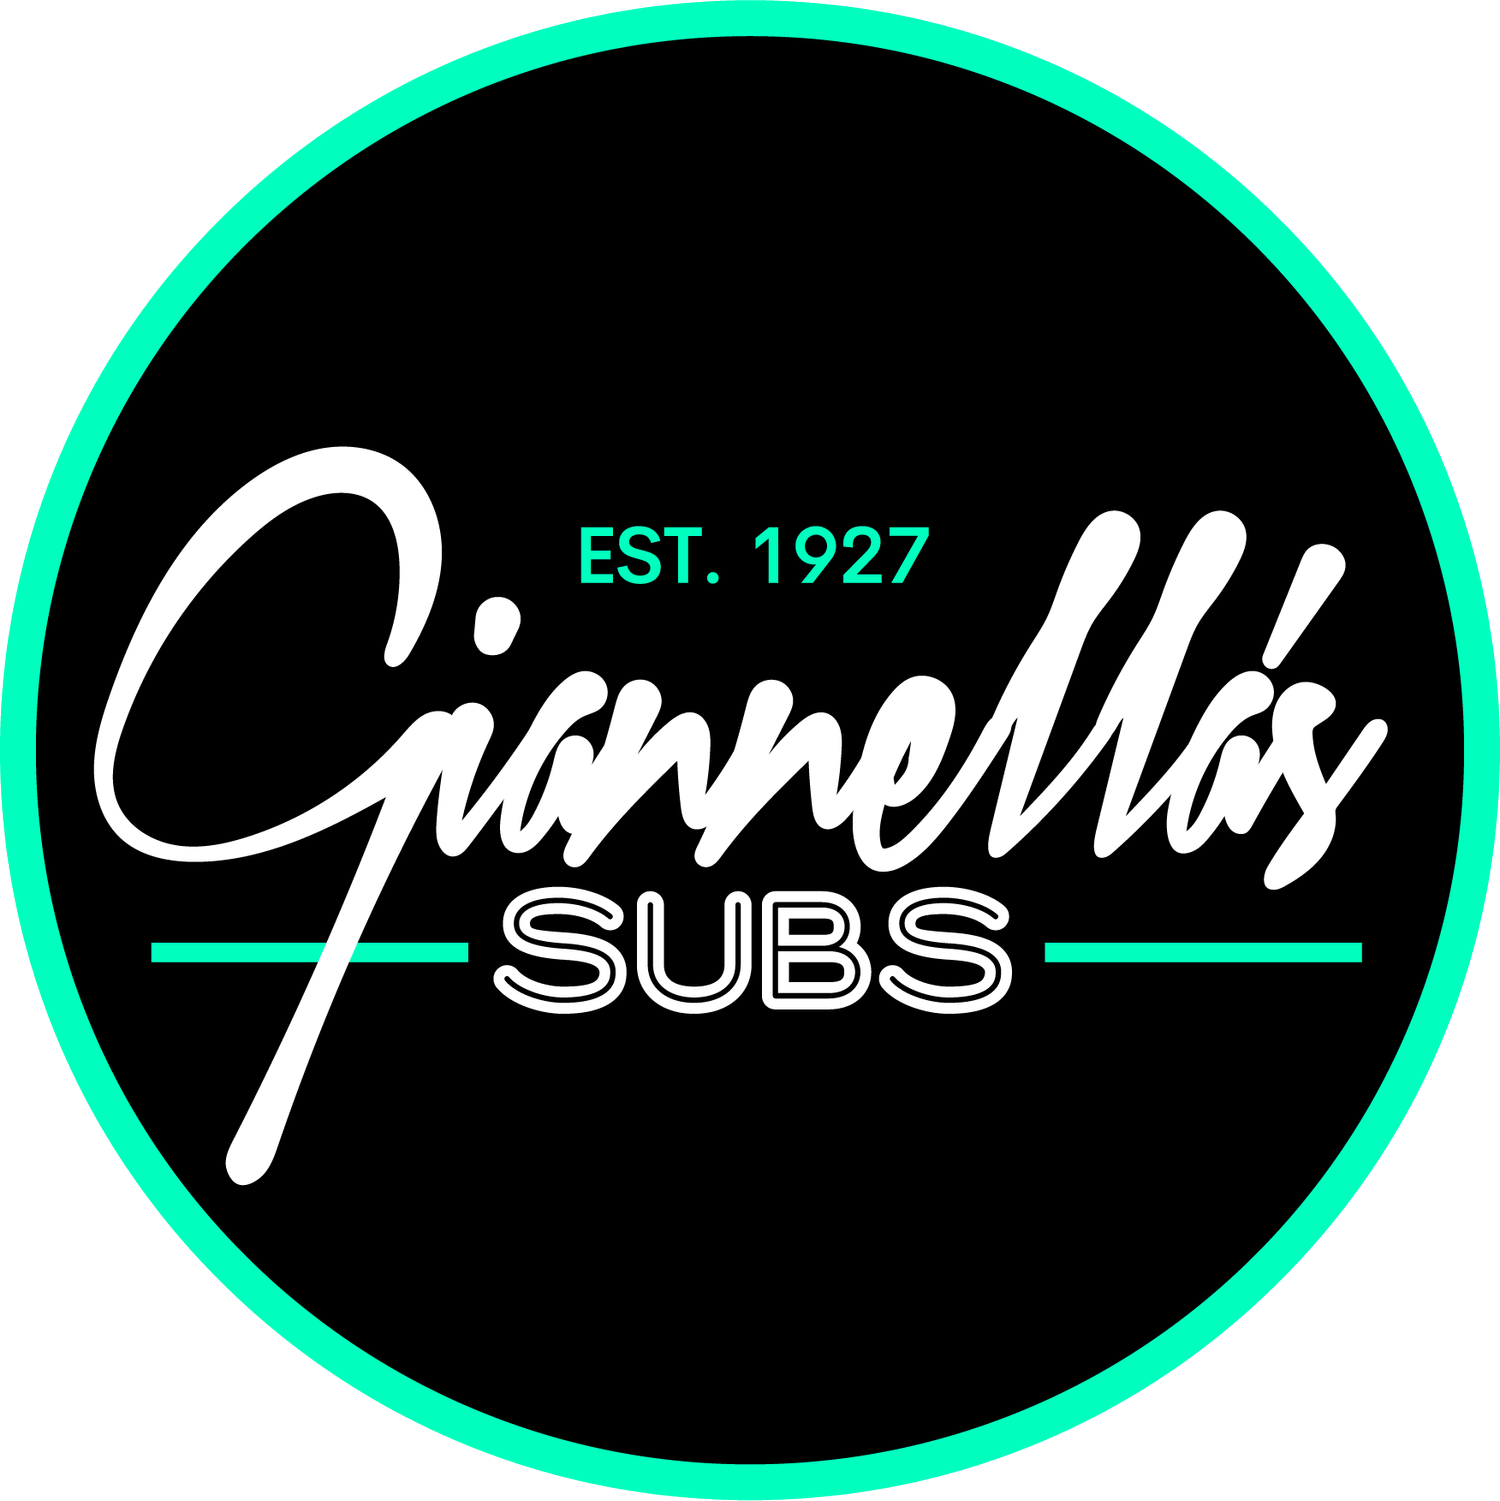 Giannella's Subs